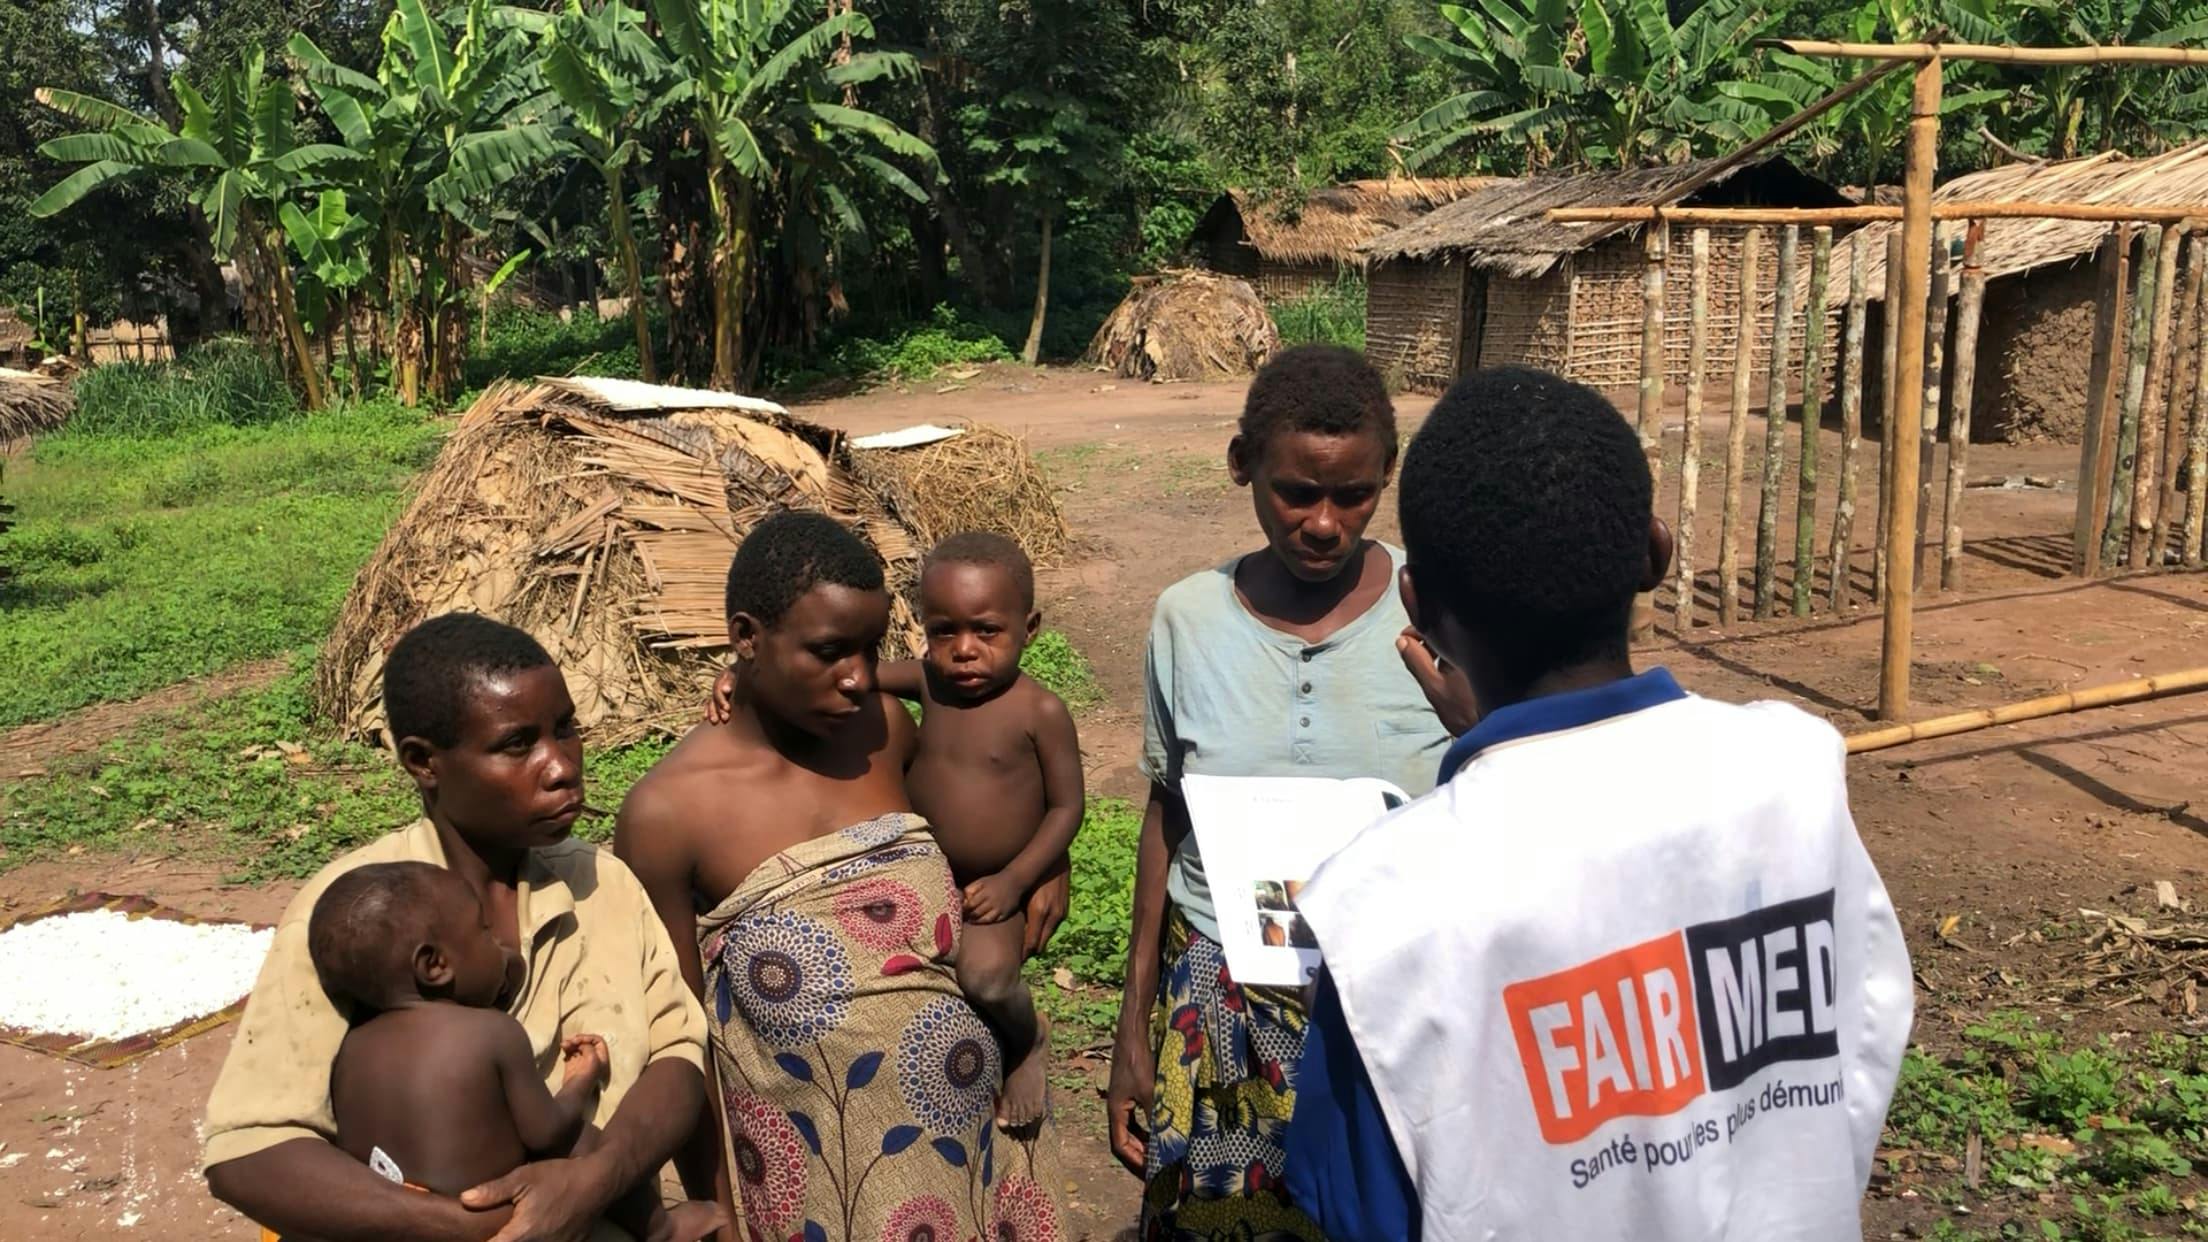 FAIRMED employee explains to several indigenous Aka how they can protect themselves from diseases. The Aka village with rudimentary thatched huts can be seen in the background. The picture shows three Aka women, two of whom are each holding a baby in their arms.